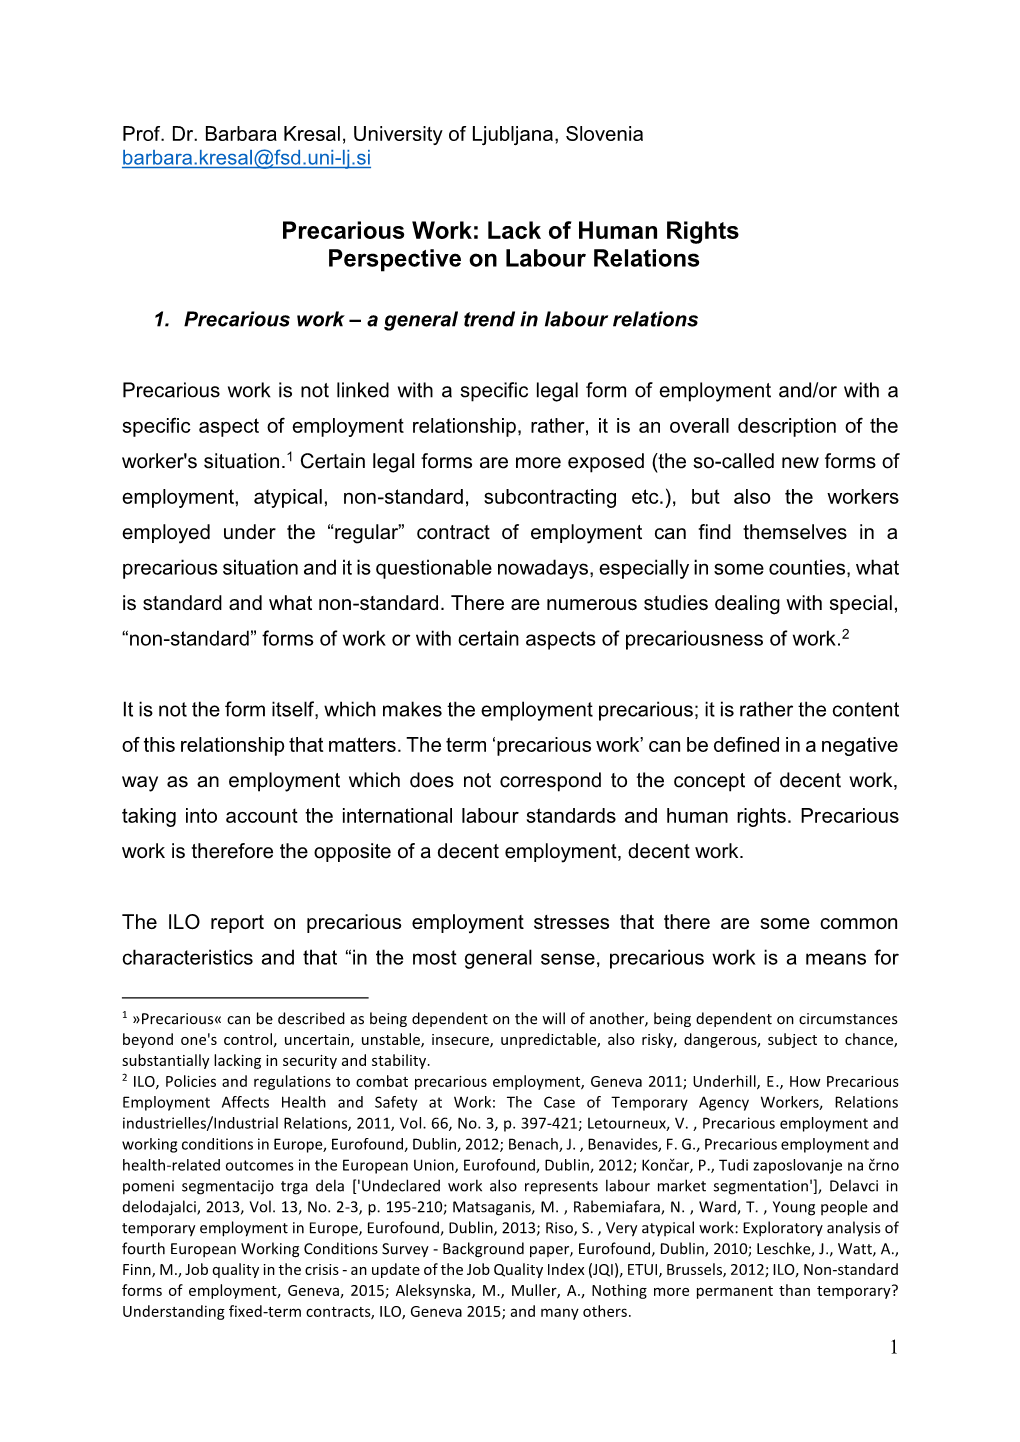 Precarious Work: Lack of Human Rights Perspective on Labour Relations